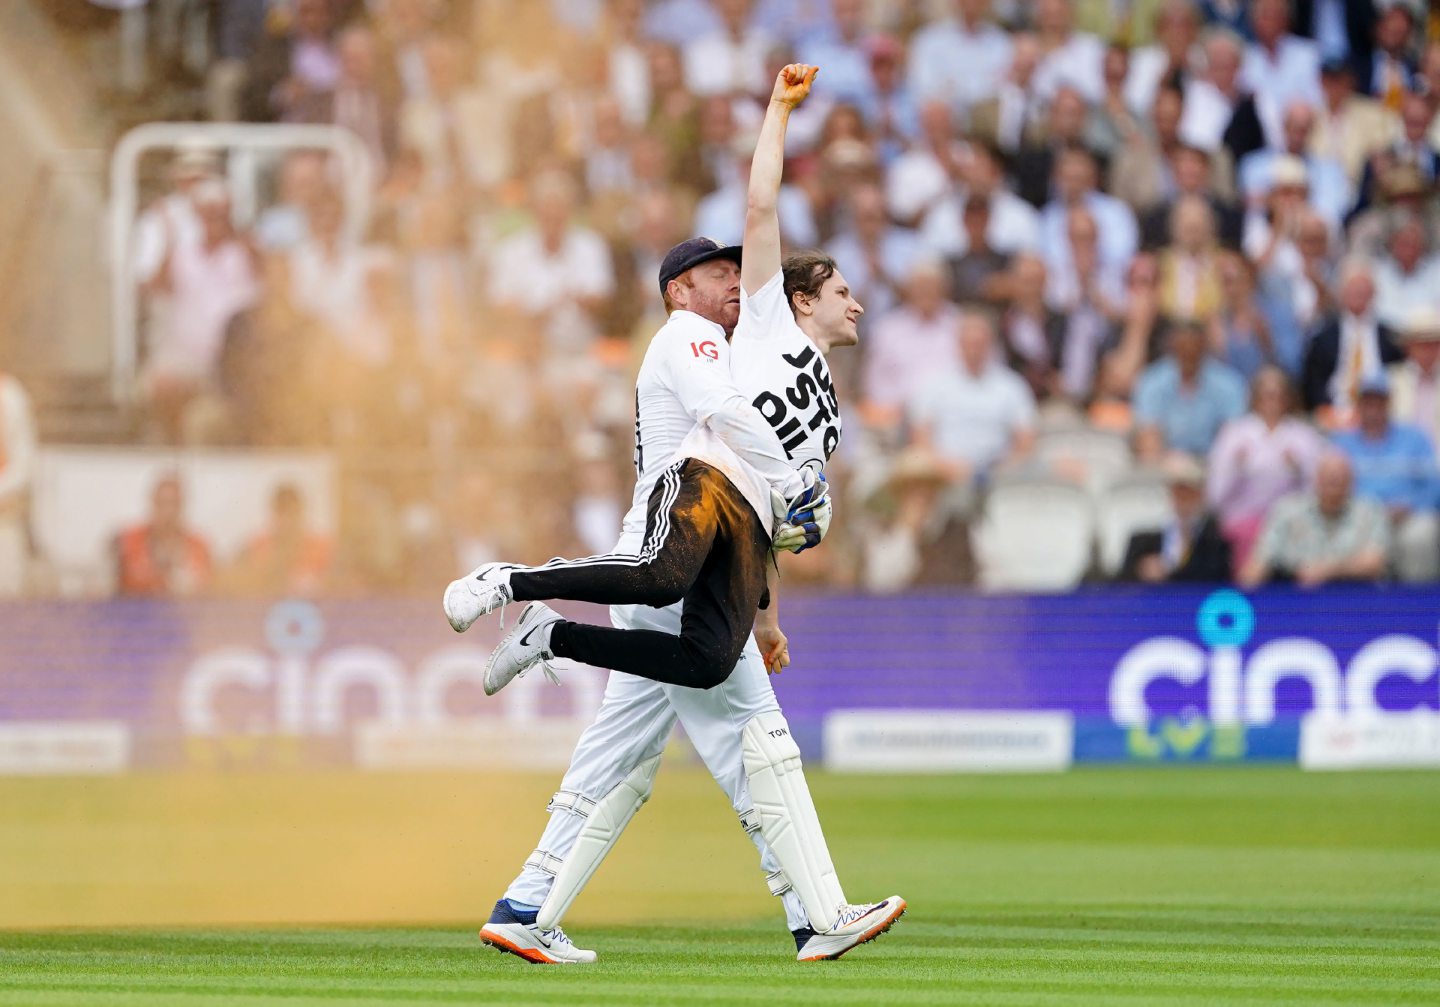 England cricketer Jonny Bairstow removes a Just Stop Oil protester from the pitch during the Ashes test match at Lord's